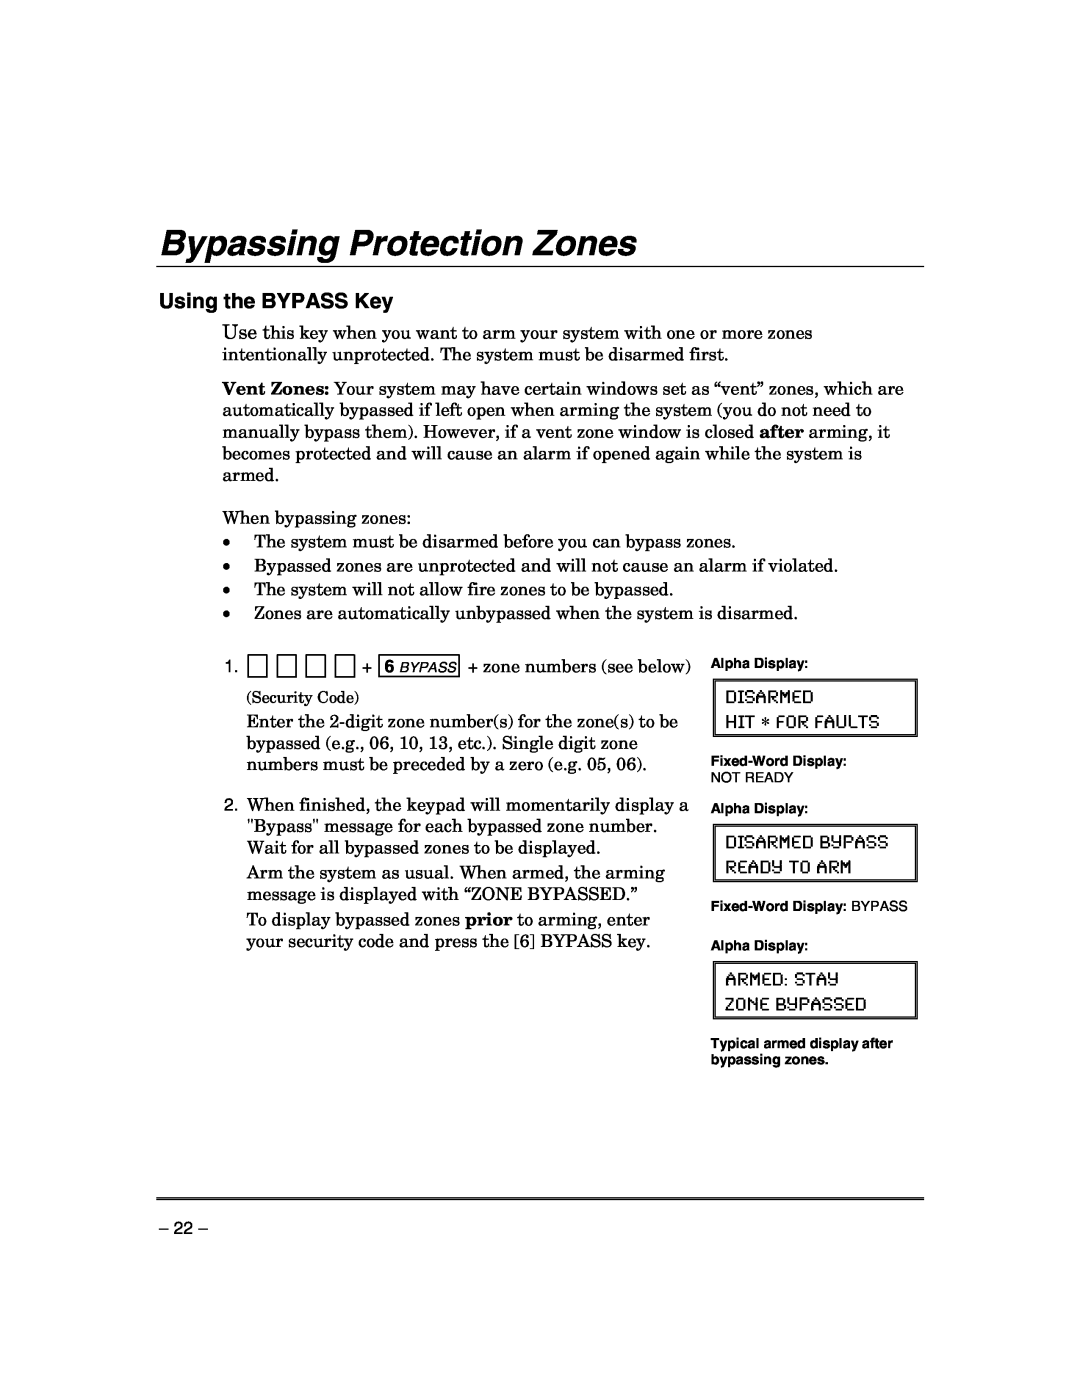 Honeywell VISTA-21IPSIA manual Bypassing Protection Zones, Using the BYPASS Key, Disarmed Hit ∗ For Faults 